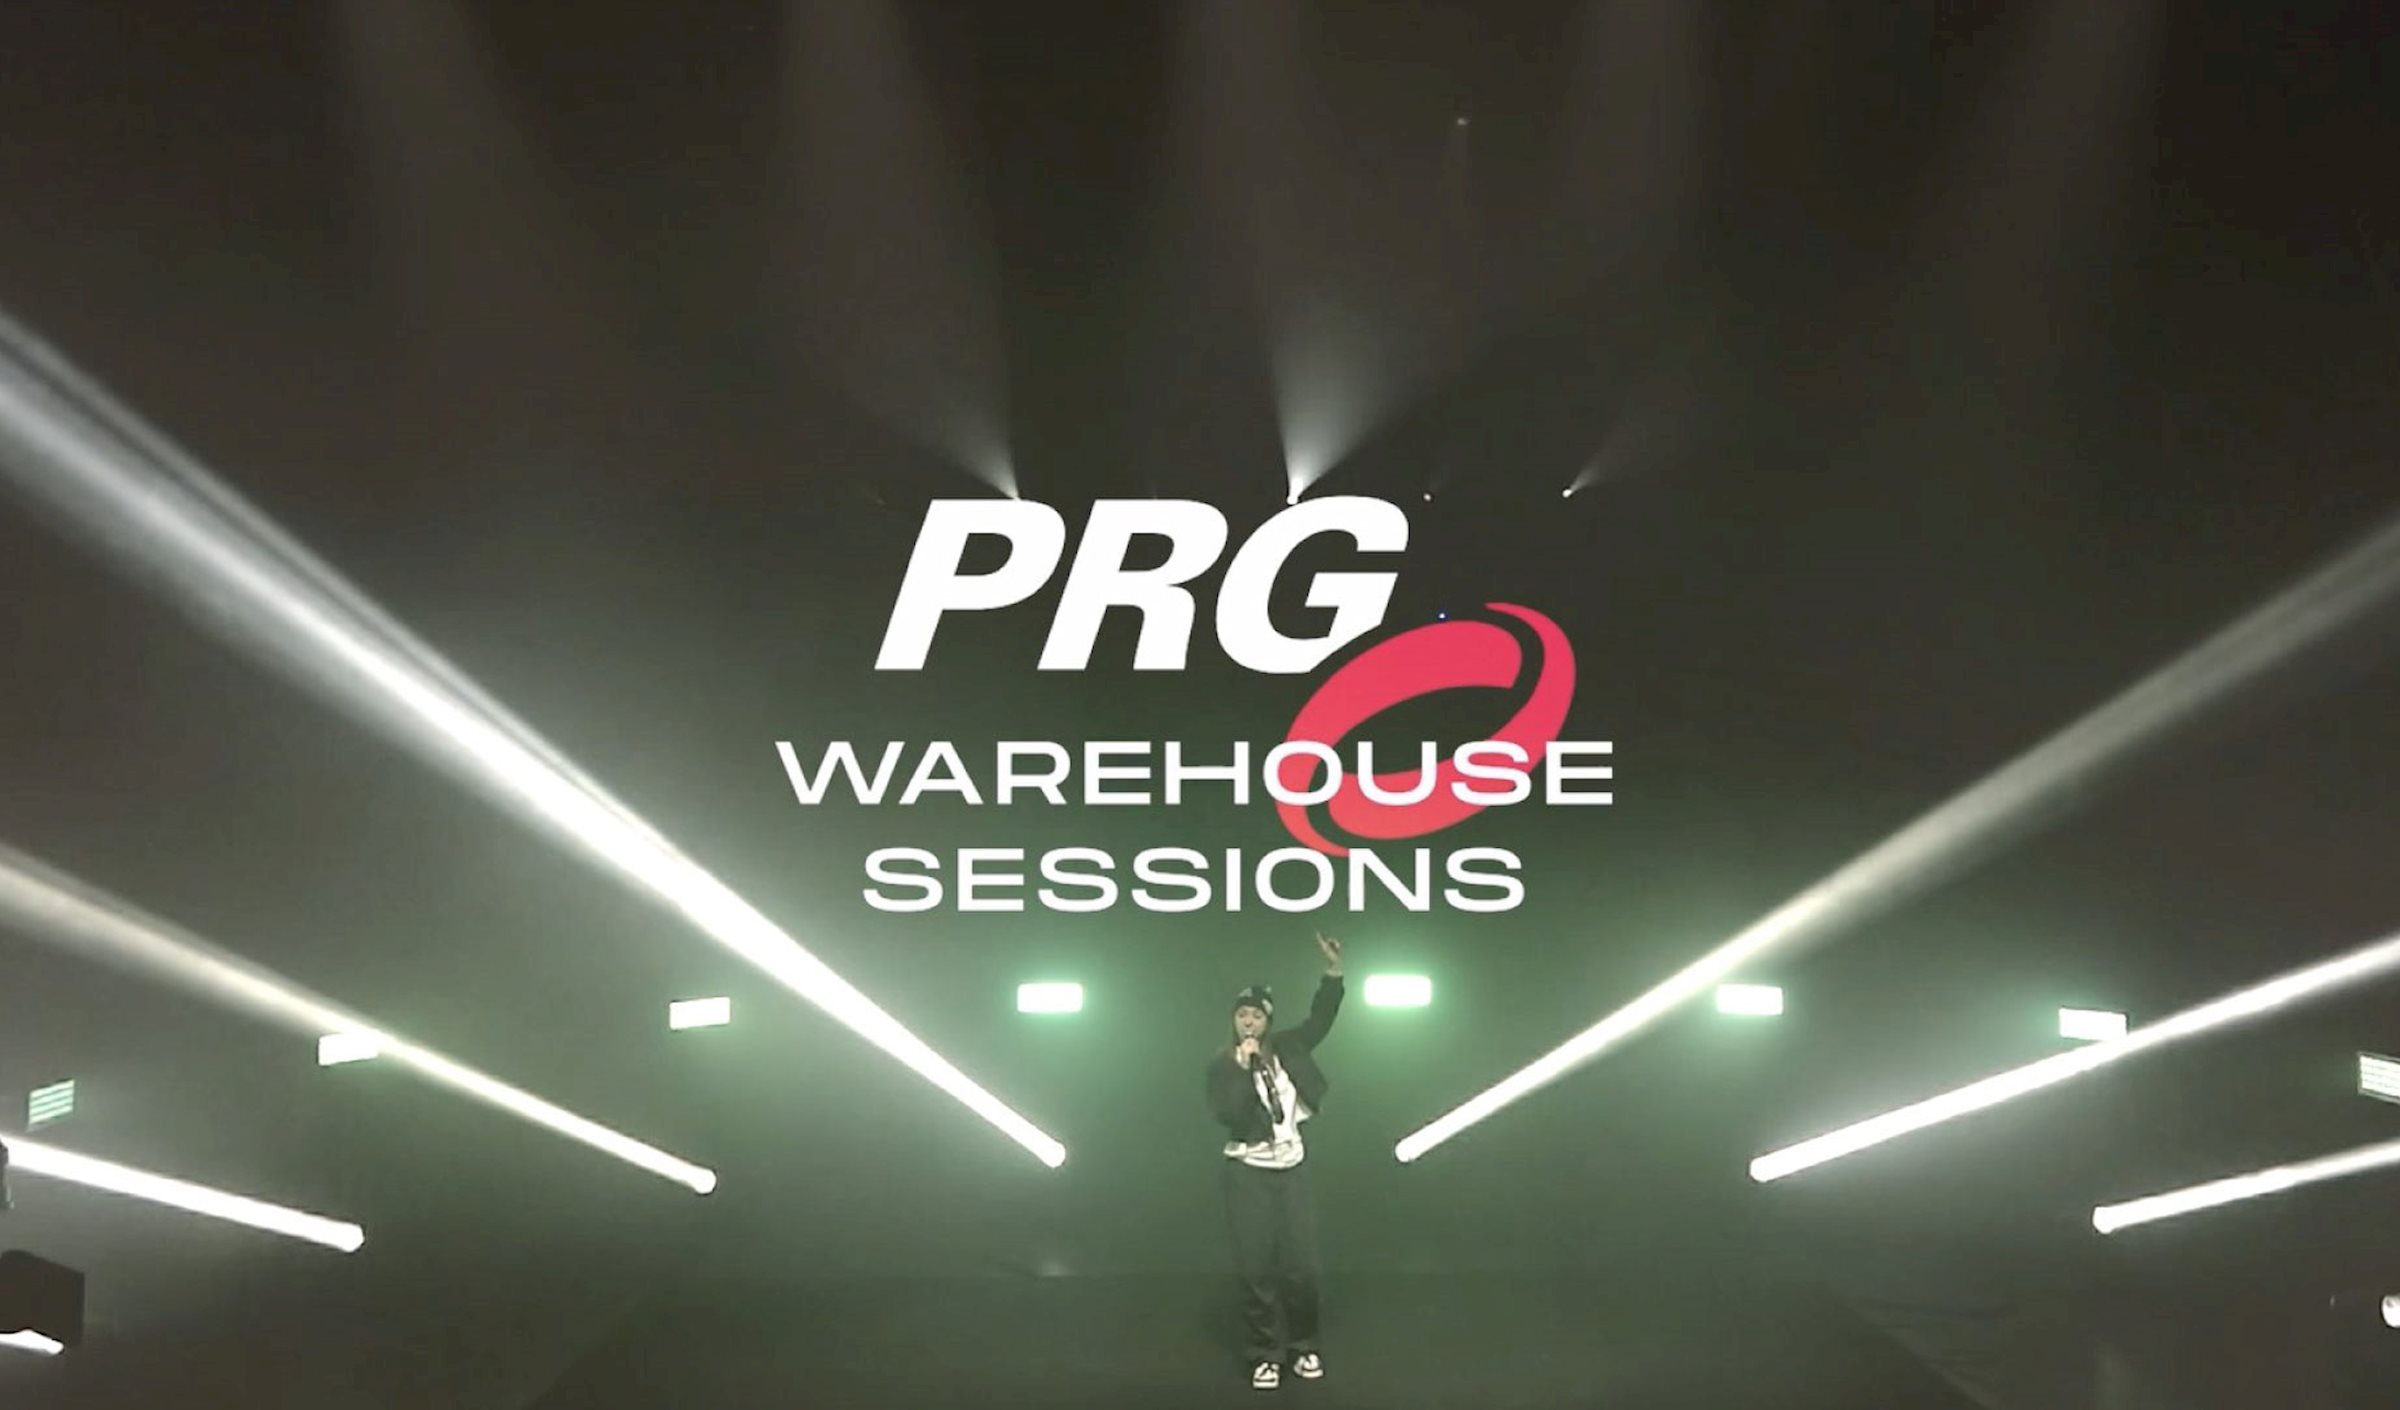 The PRG Warehouse Sessions return for the second round - Our Belgian PRG Team invites upcoming artists to the PRG Warehouse Stage.